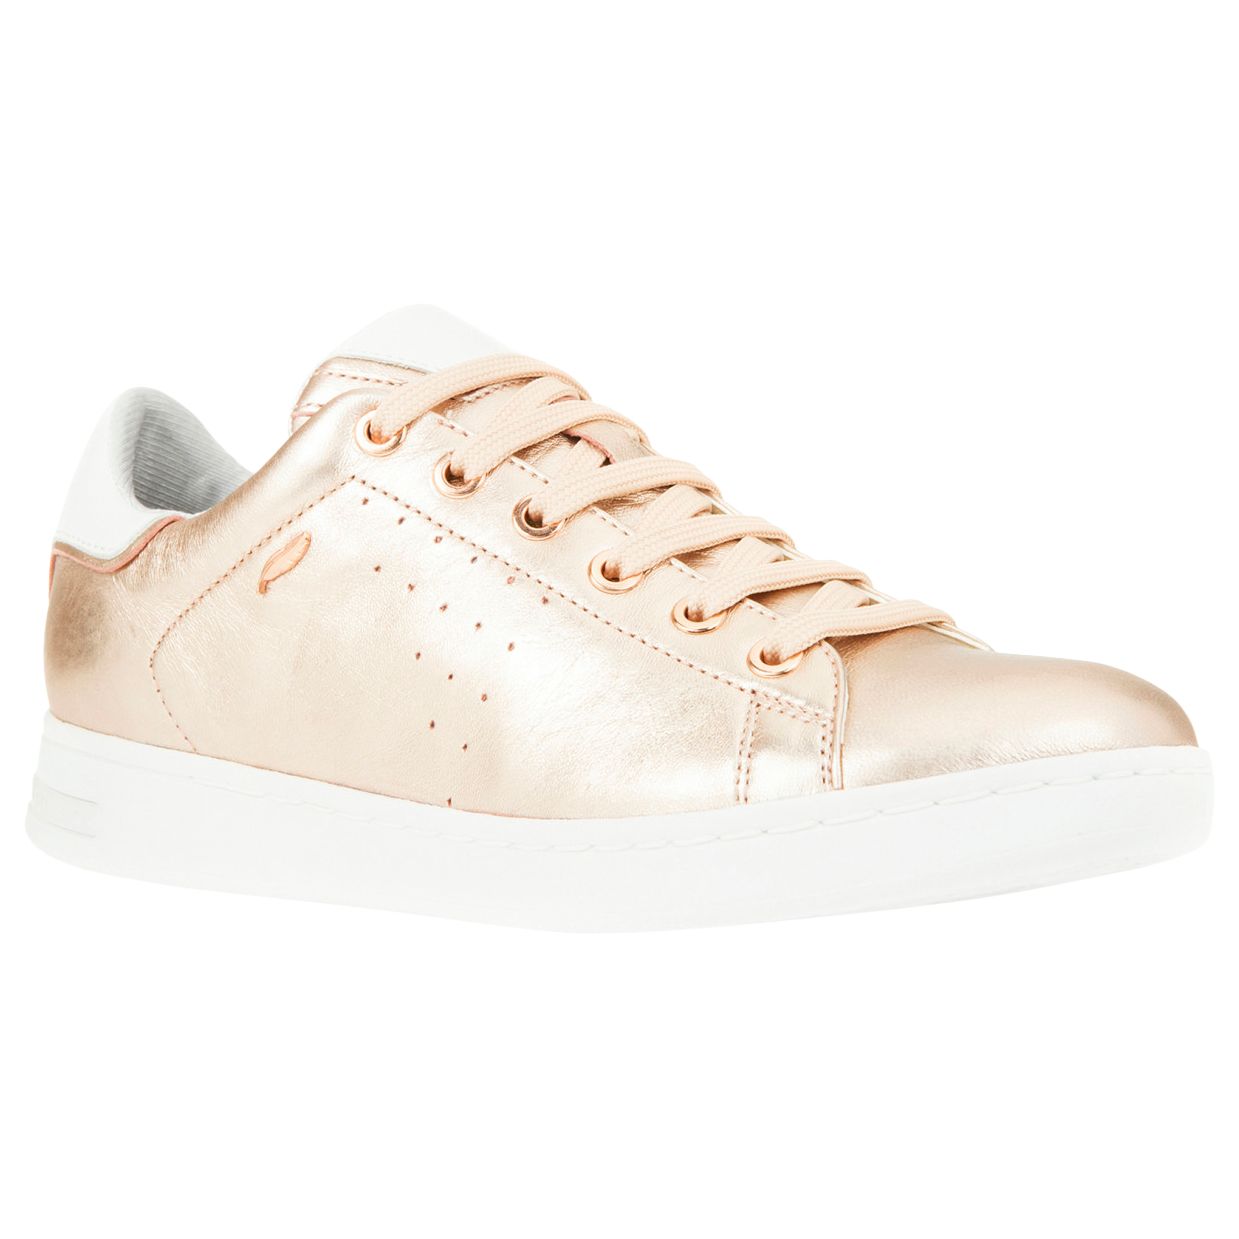 michael kors lace up sneakers